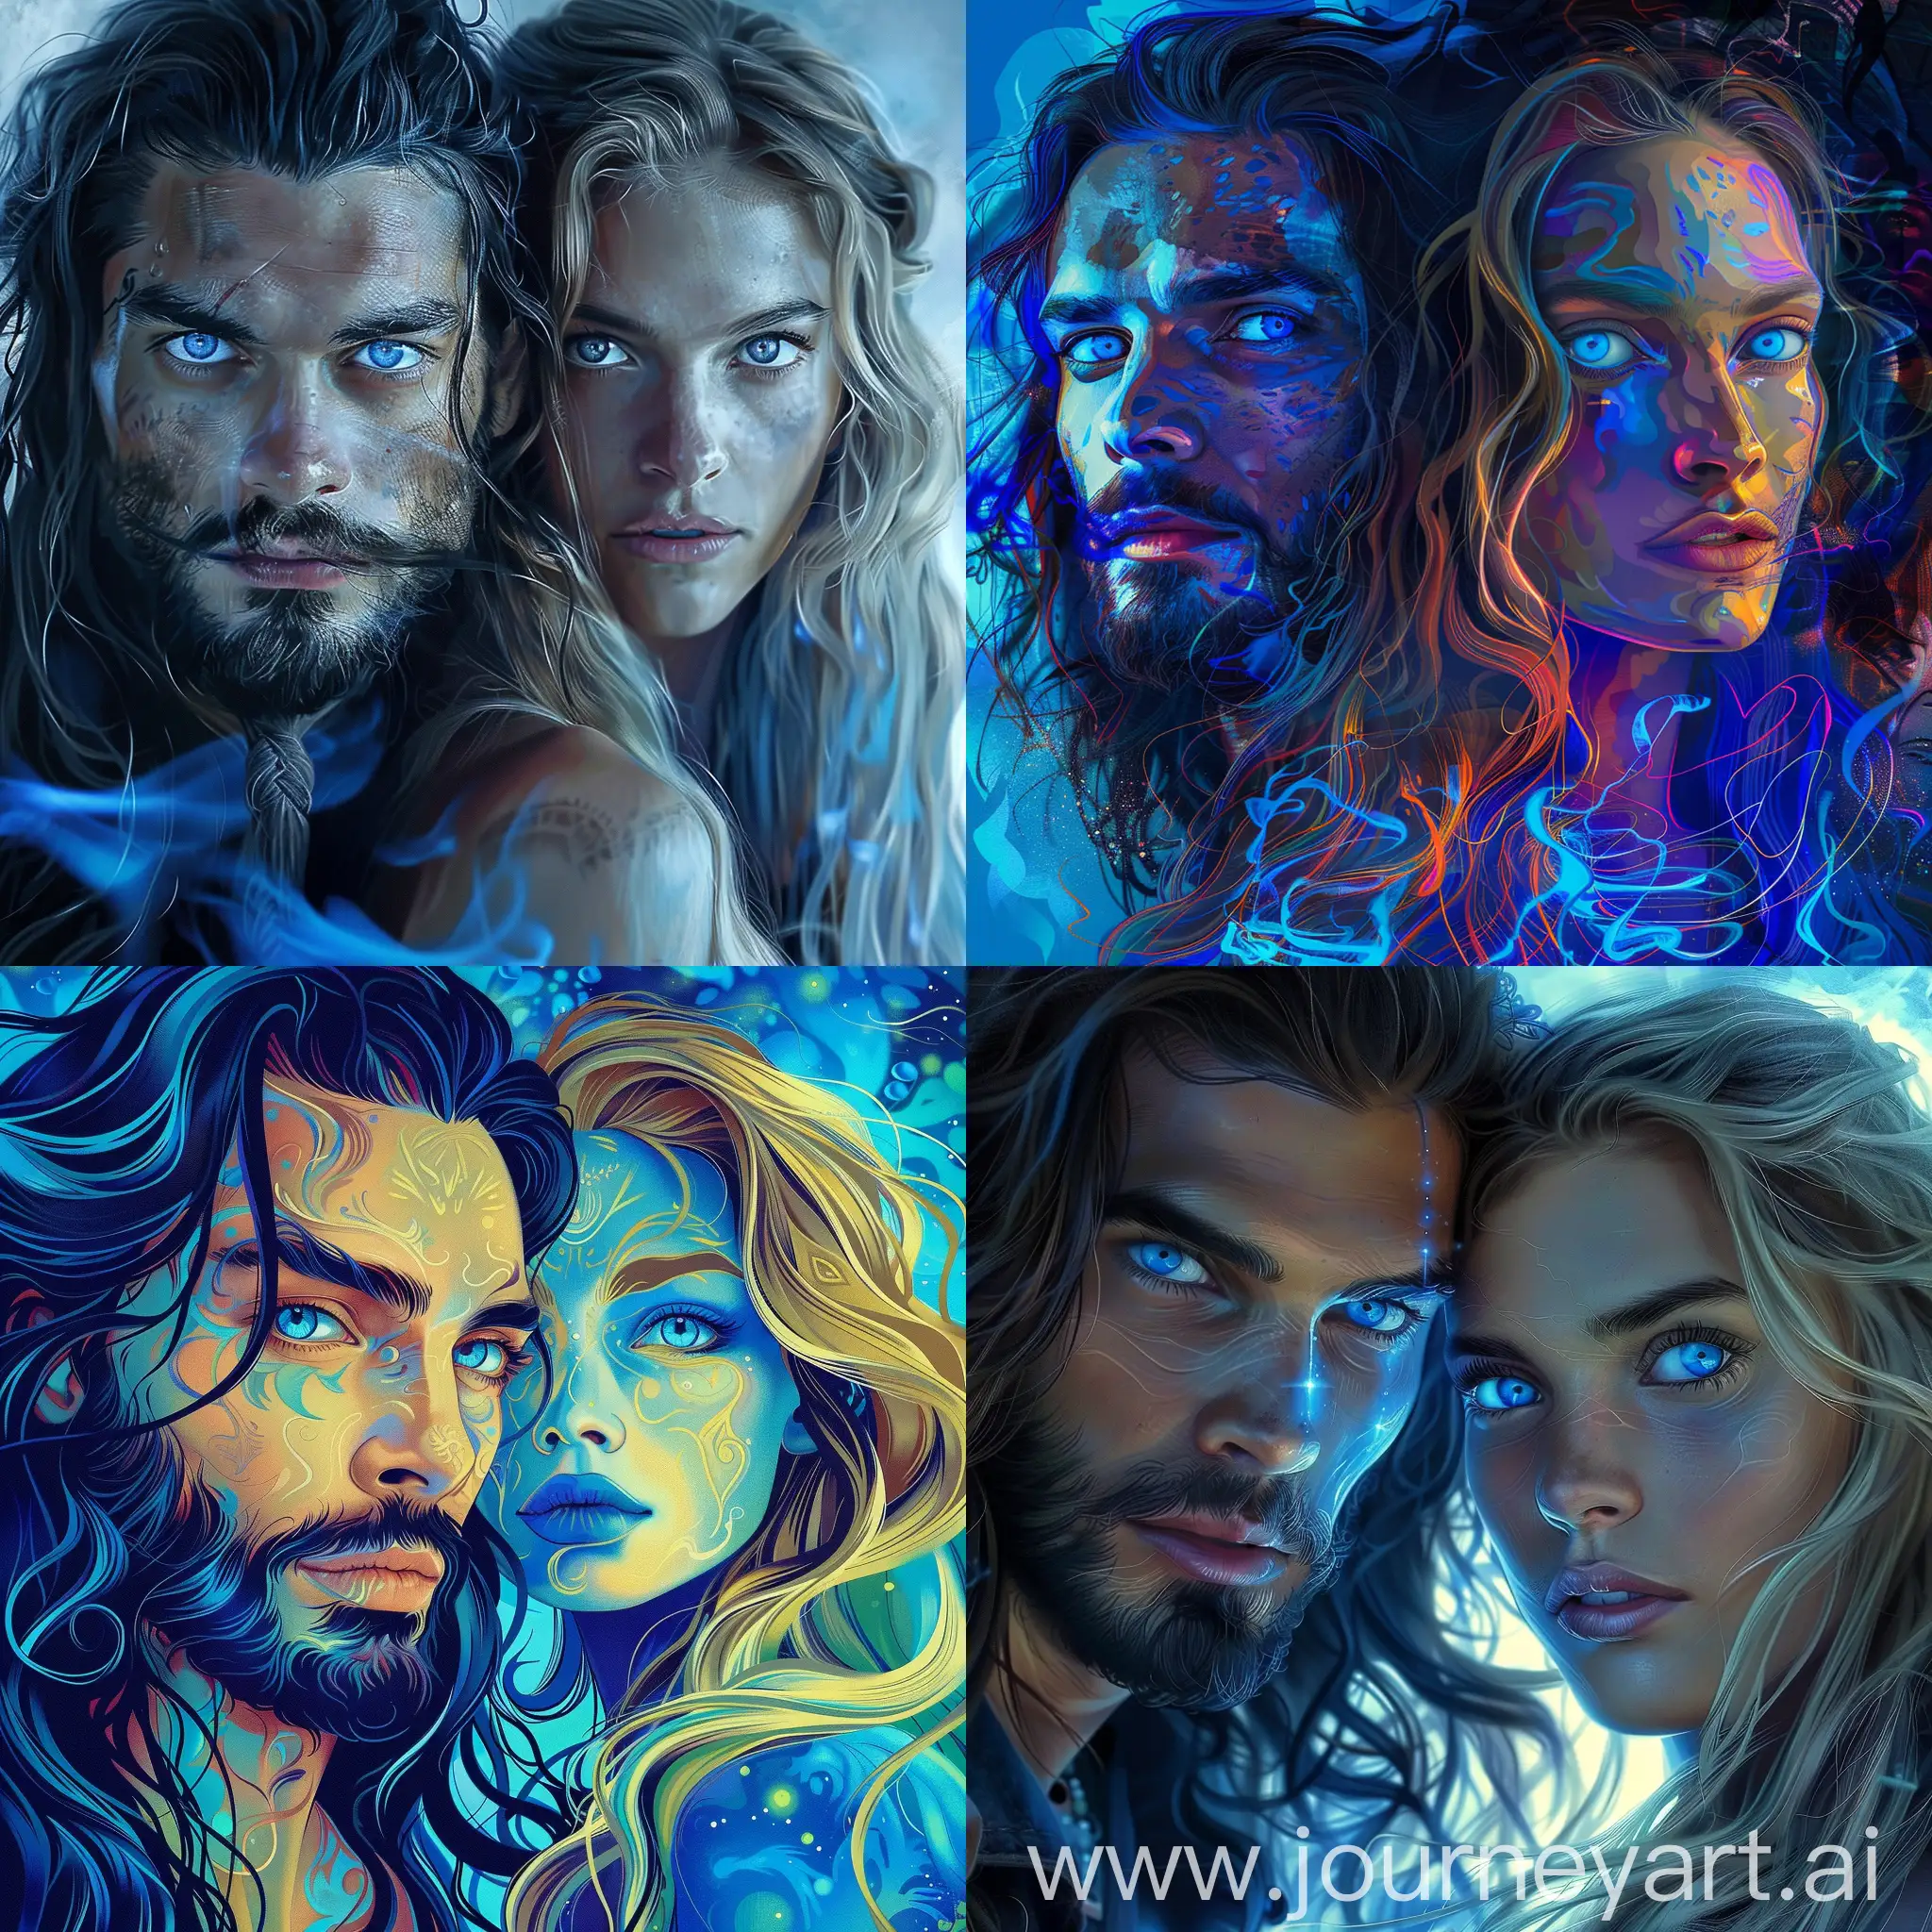 A man with blue eyes, dark long hair and a beard. And a woman with blue eyes and long blond hair. Psychedelic style.